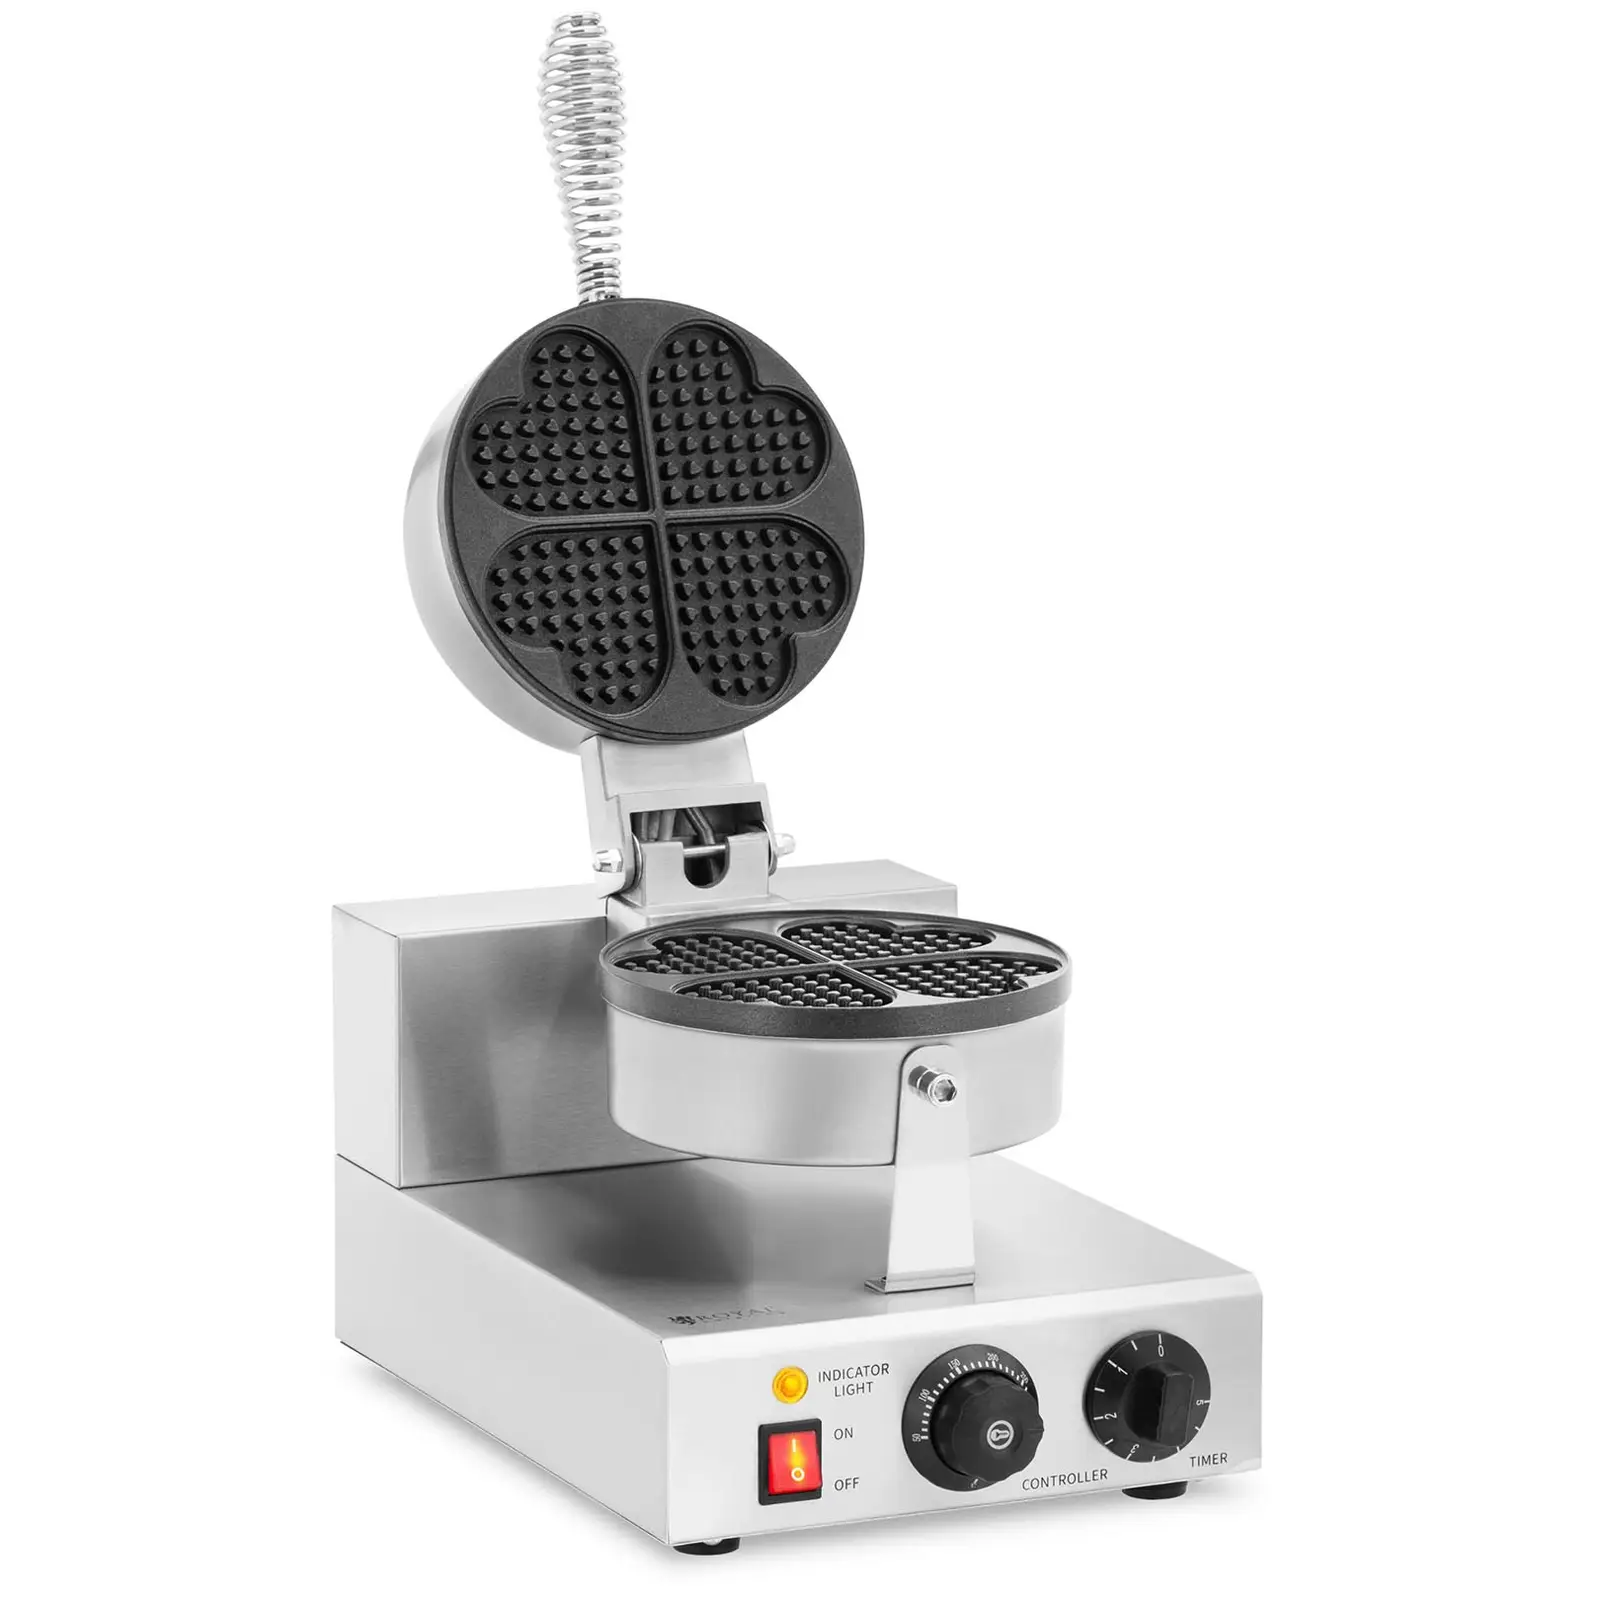 Waffle Maker - heart-shaped - 1000 W - 0 - 5 min timer - Royal Catering